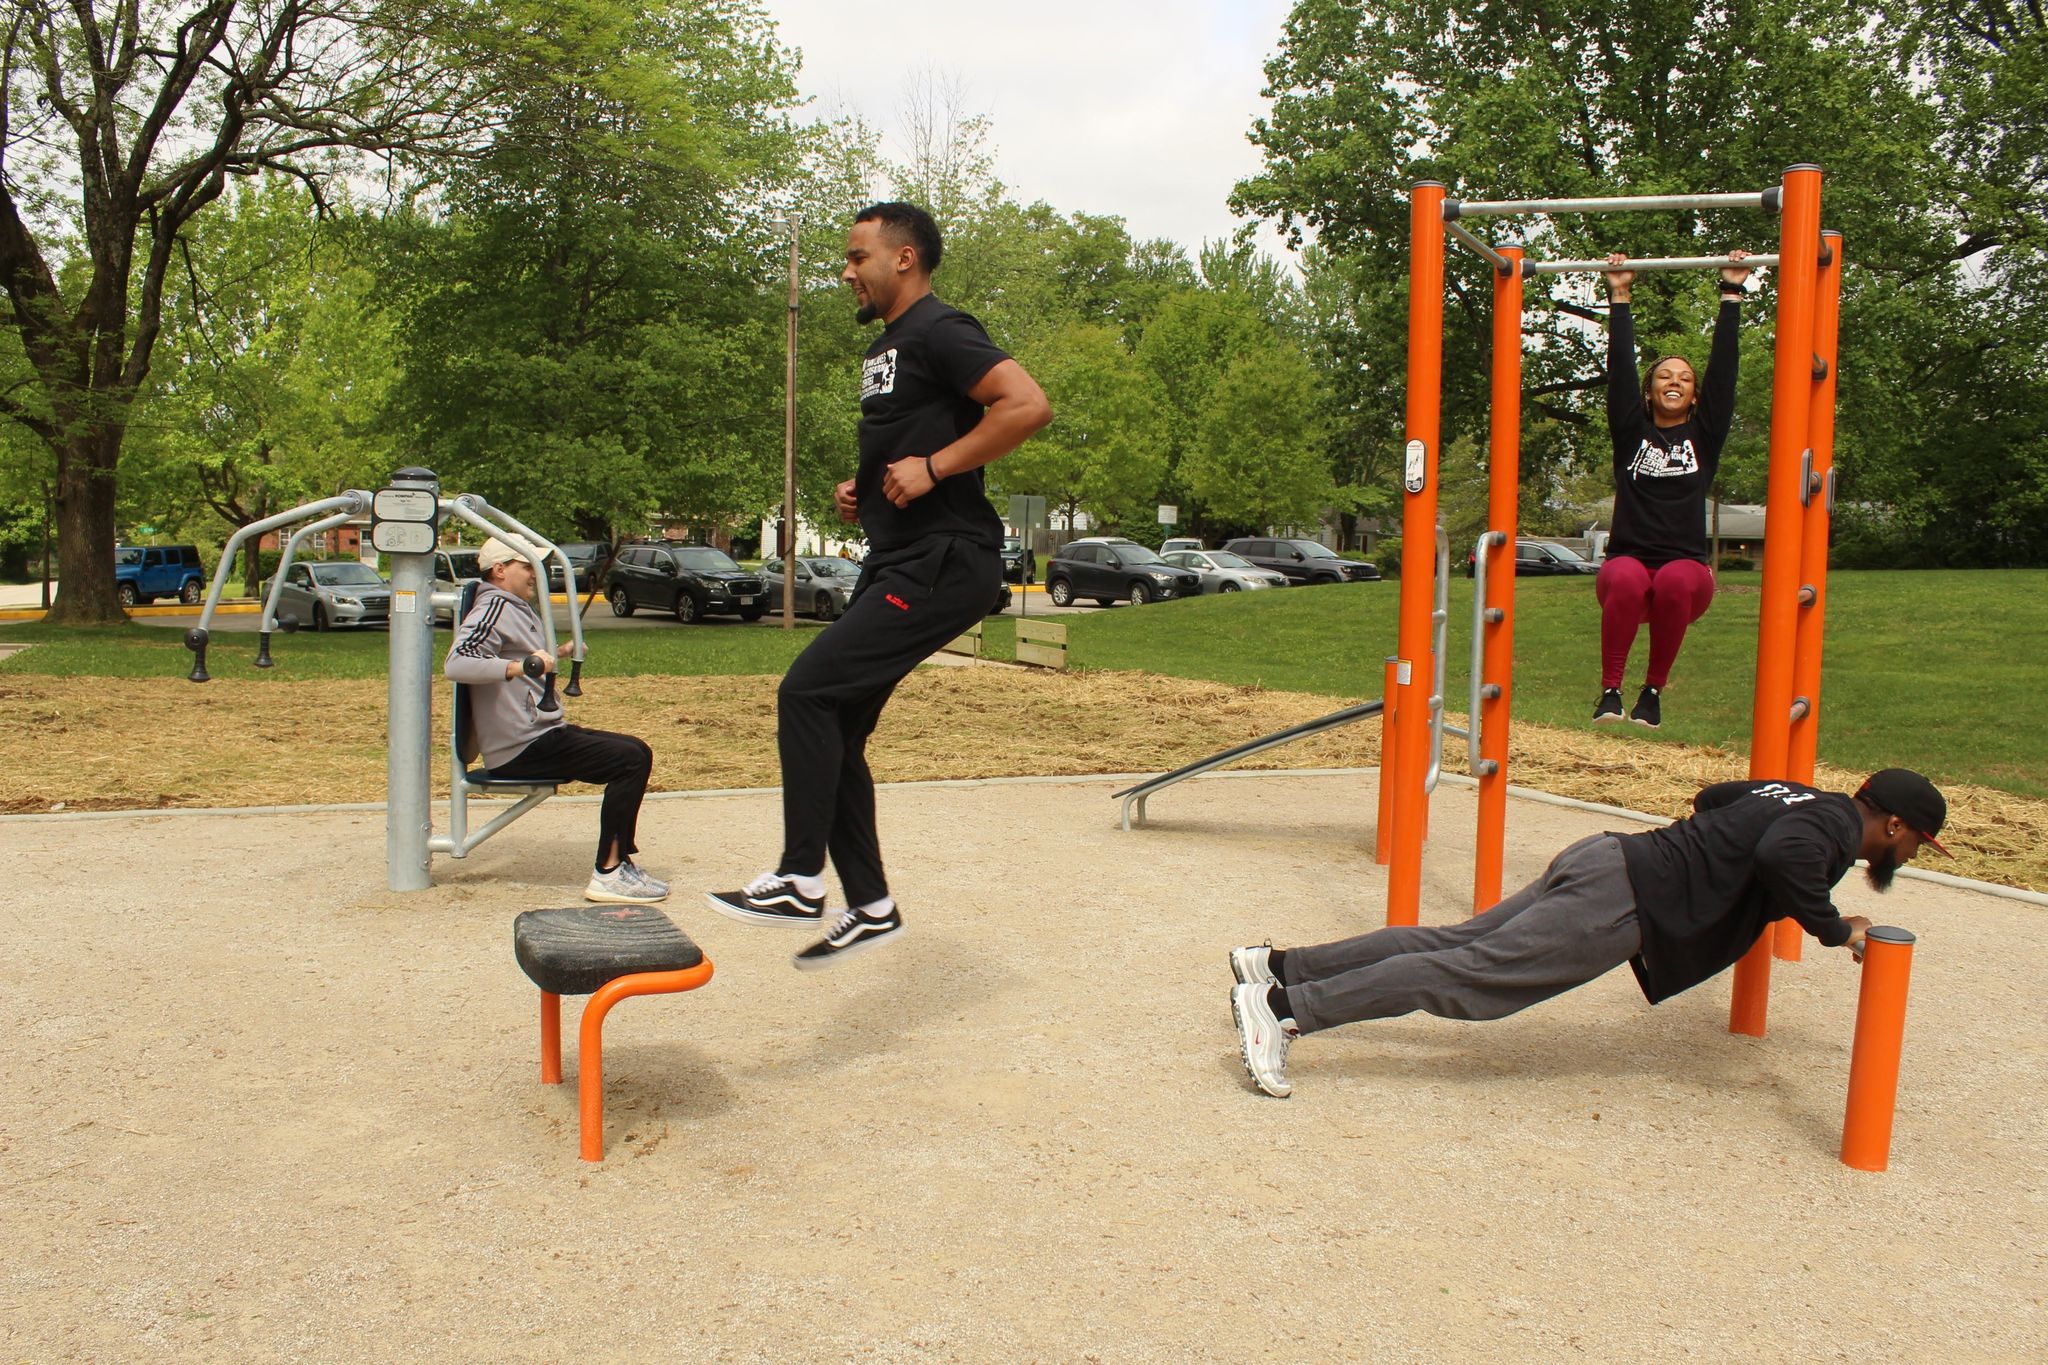 Fitness station at Bryan Park showing four different apparatus